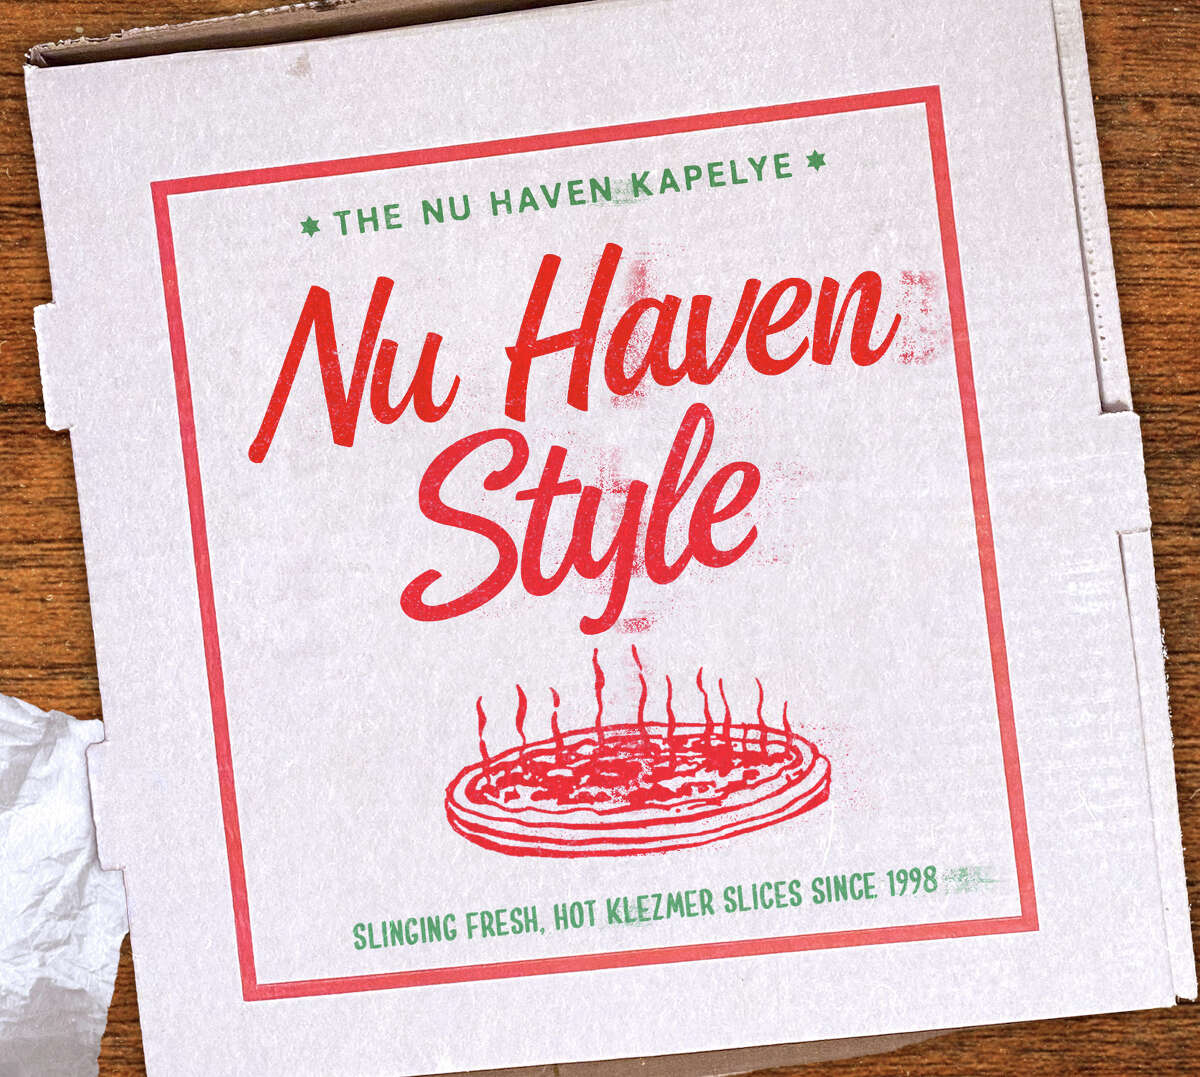 "Nu Haven Style" is the second album from the Nu Haven Kapelye.